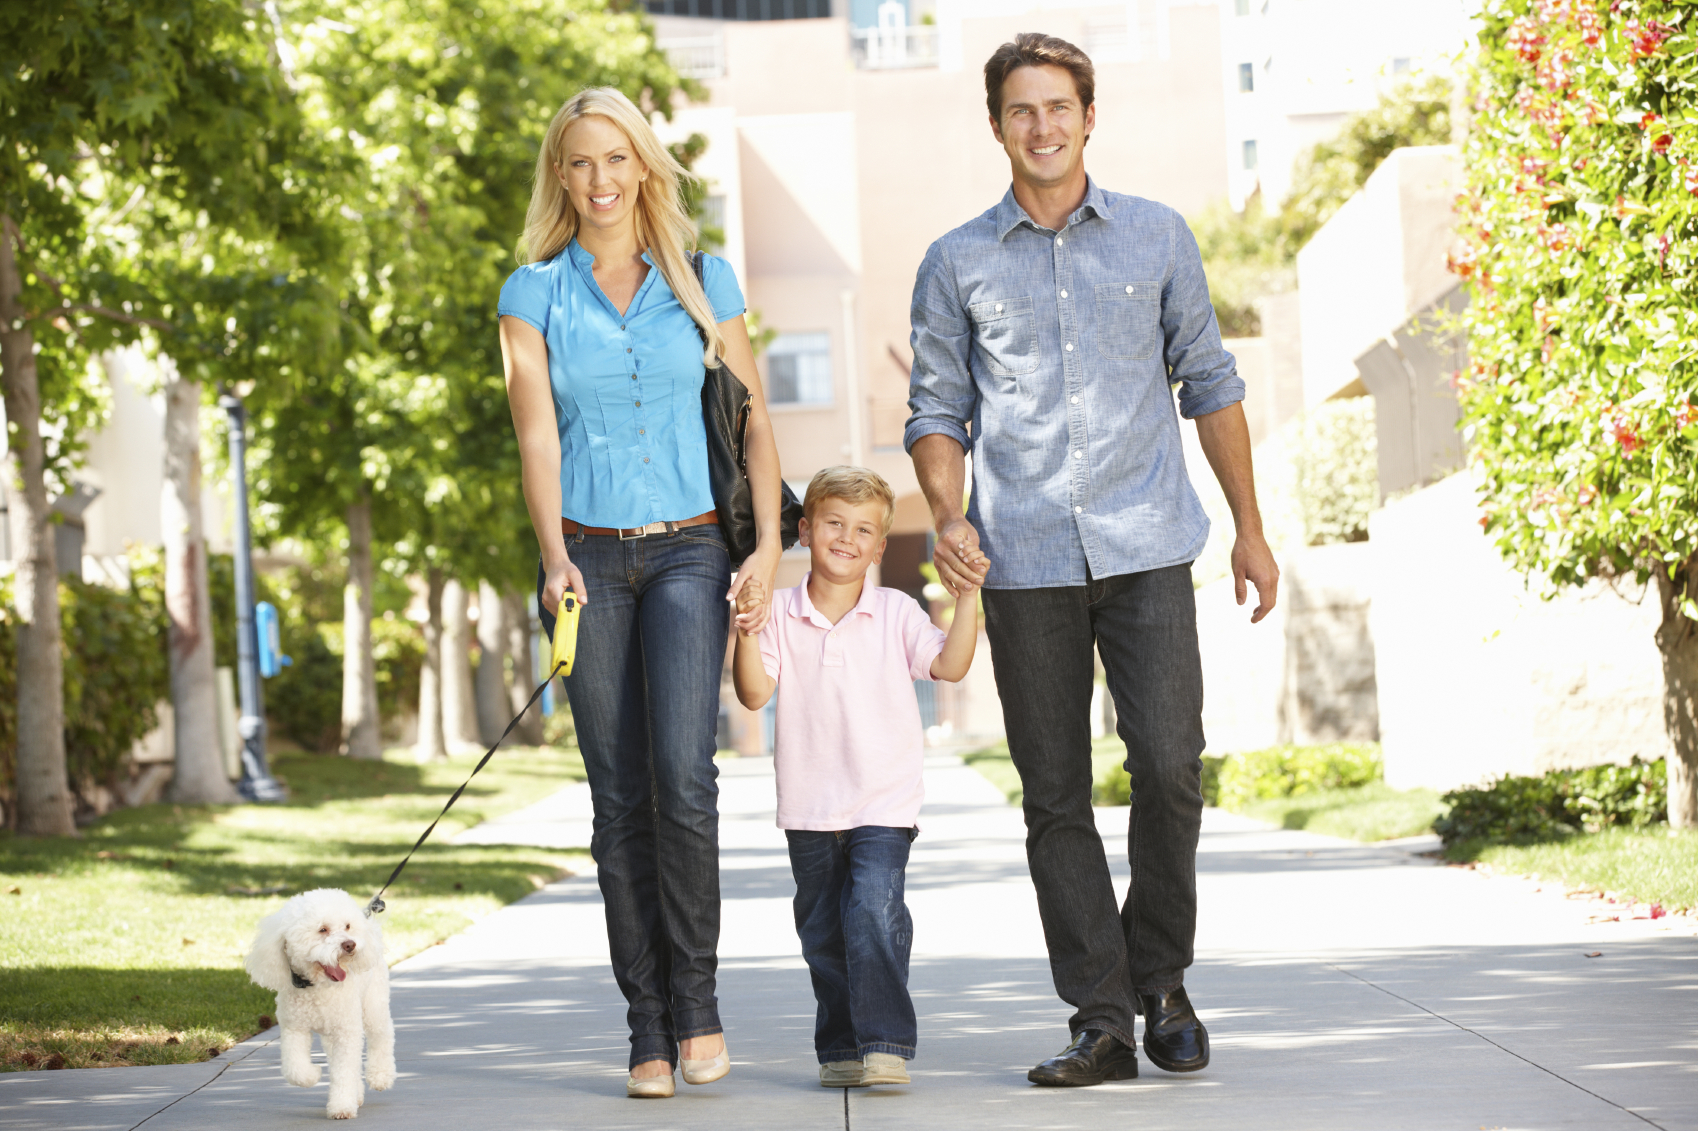 stock photo of two parents and a child, walking a dog together